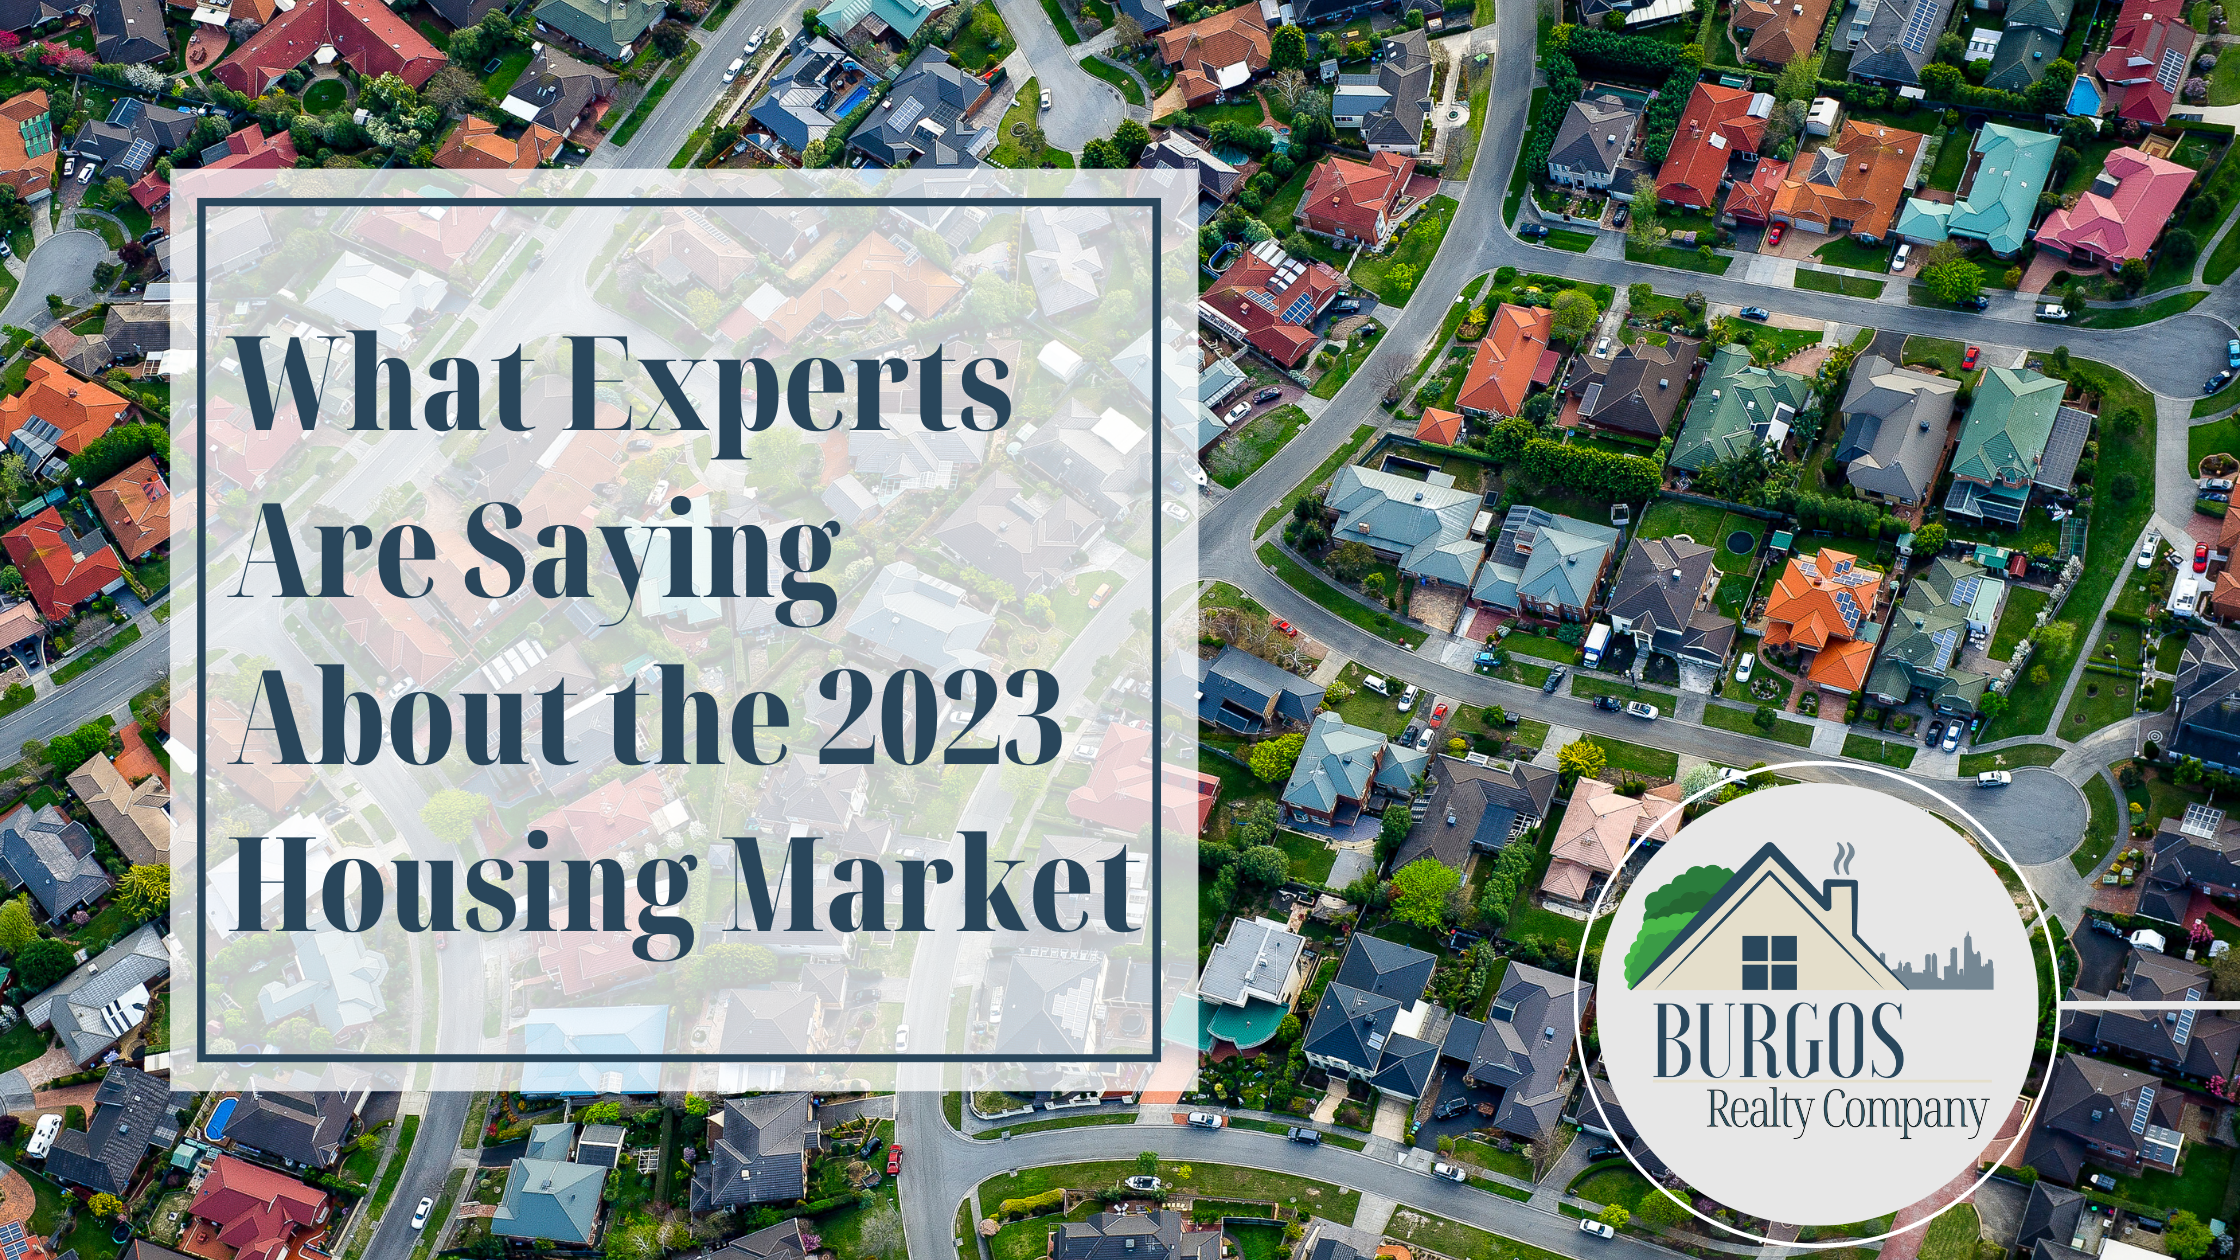 What Experts Are Saying About the 2023 Housing Market